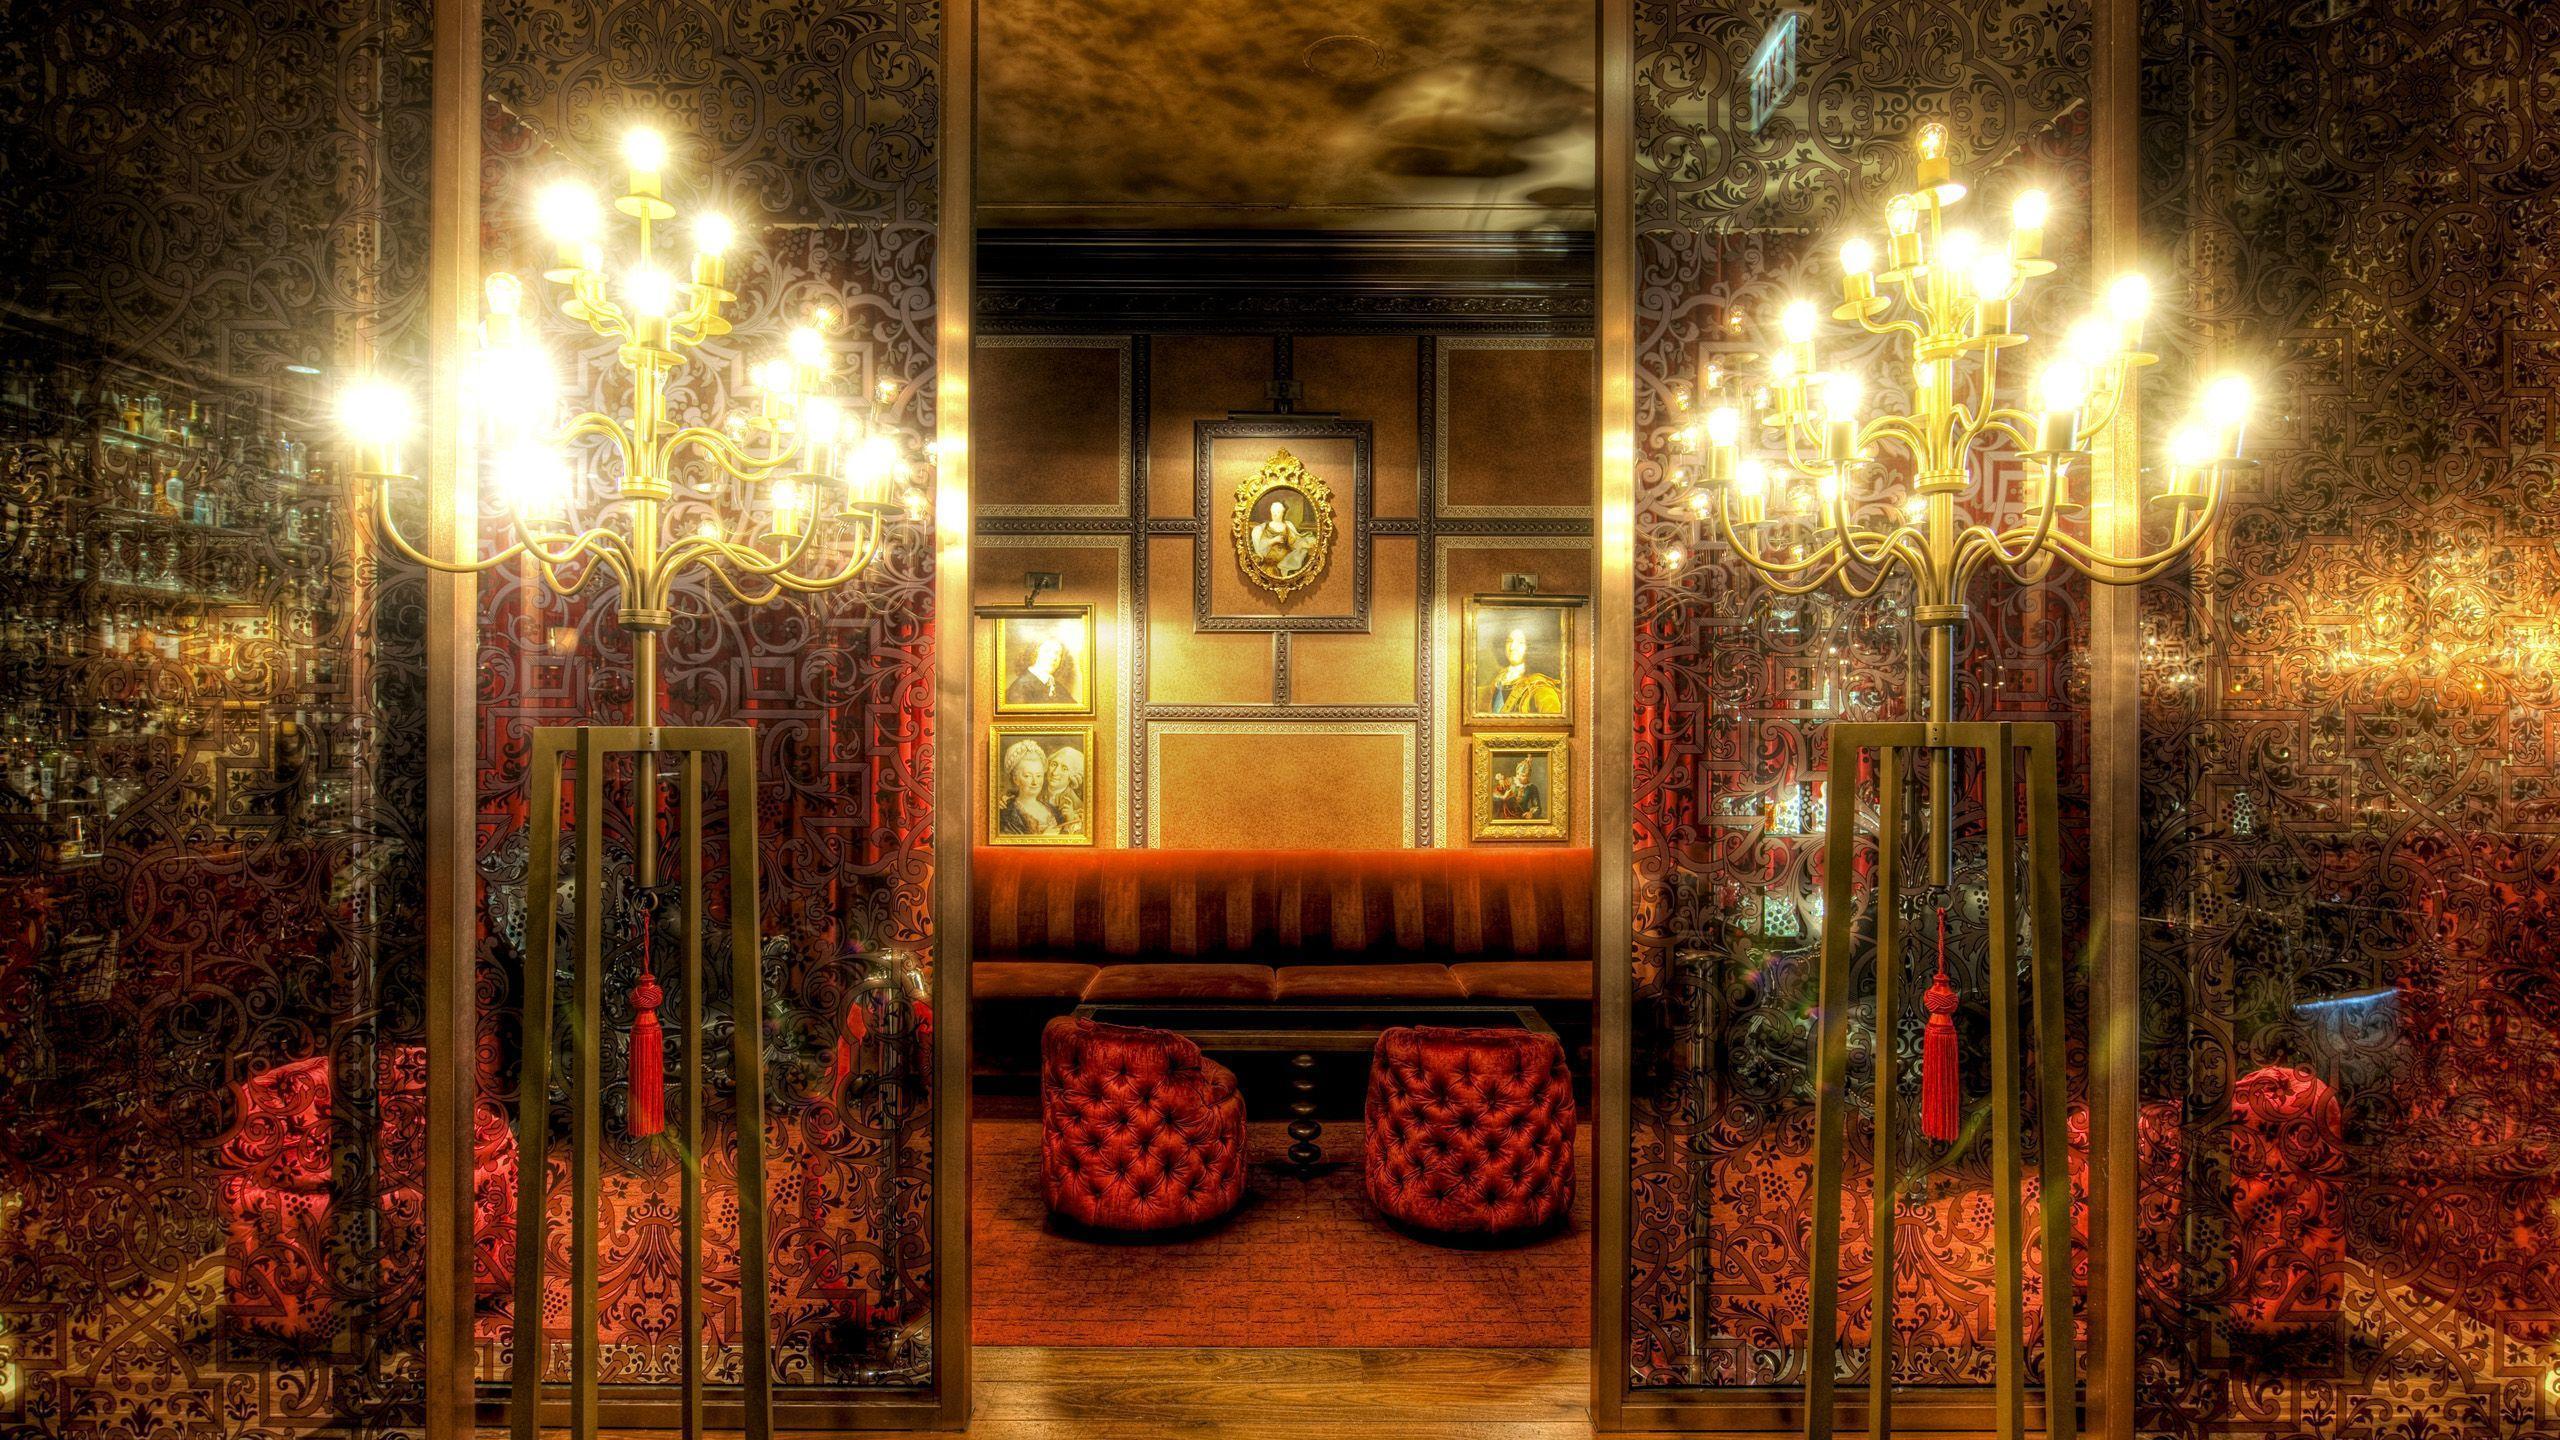 The Crimson Lounge in the Lobby of the Hotel Sax in Chicago